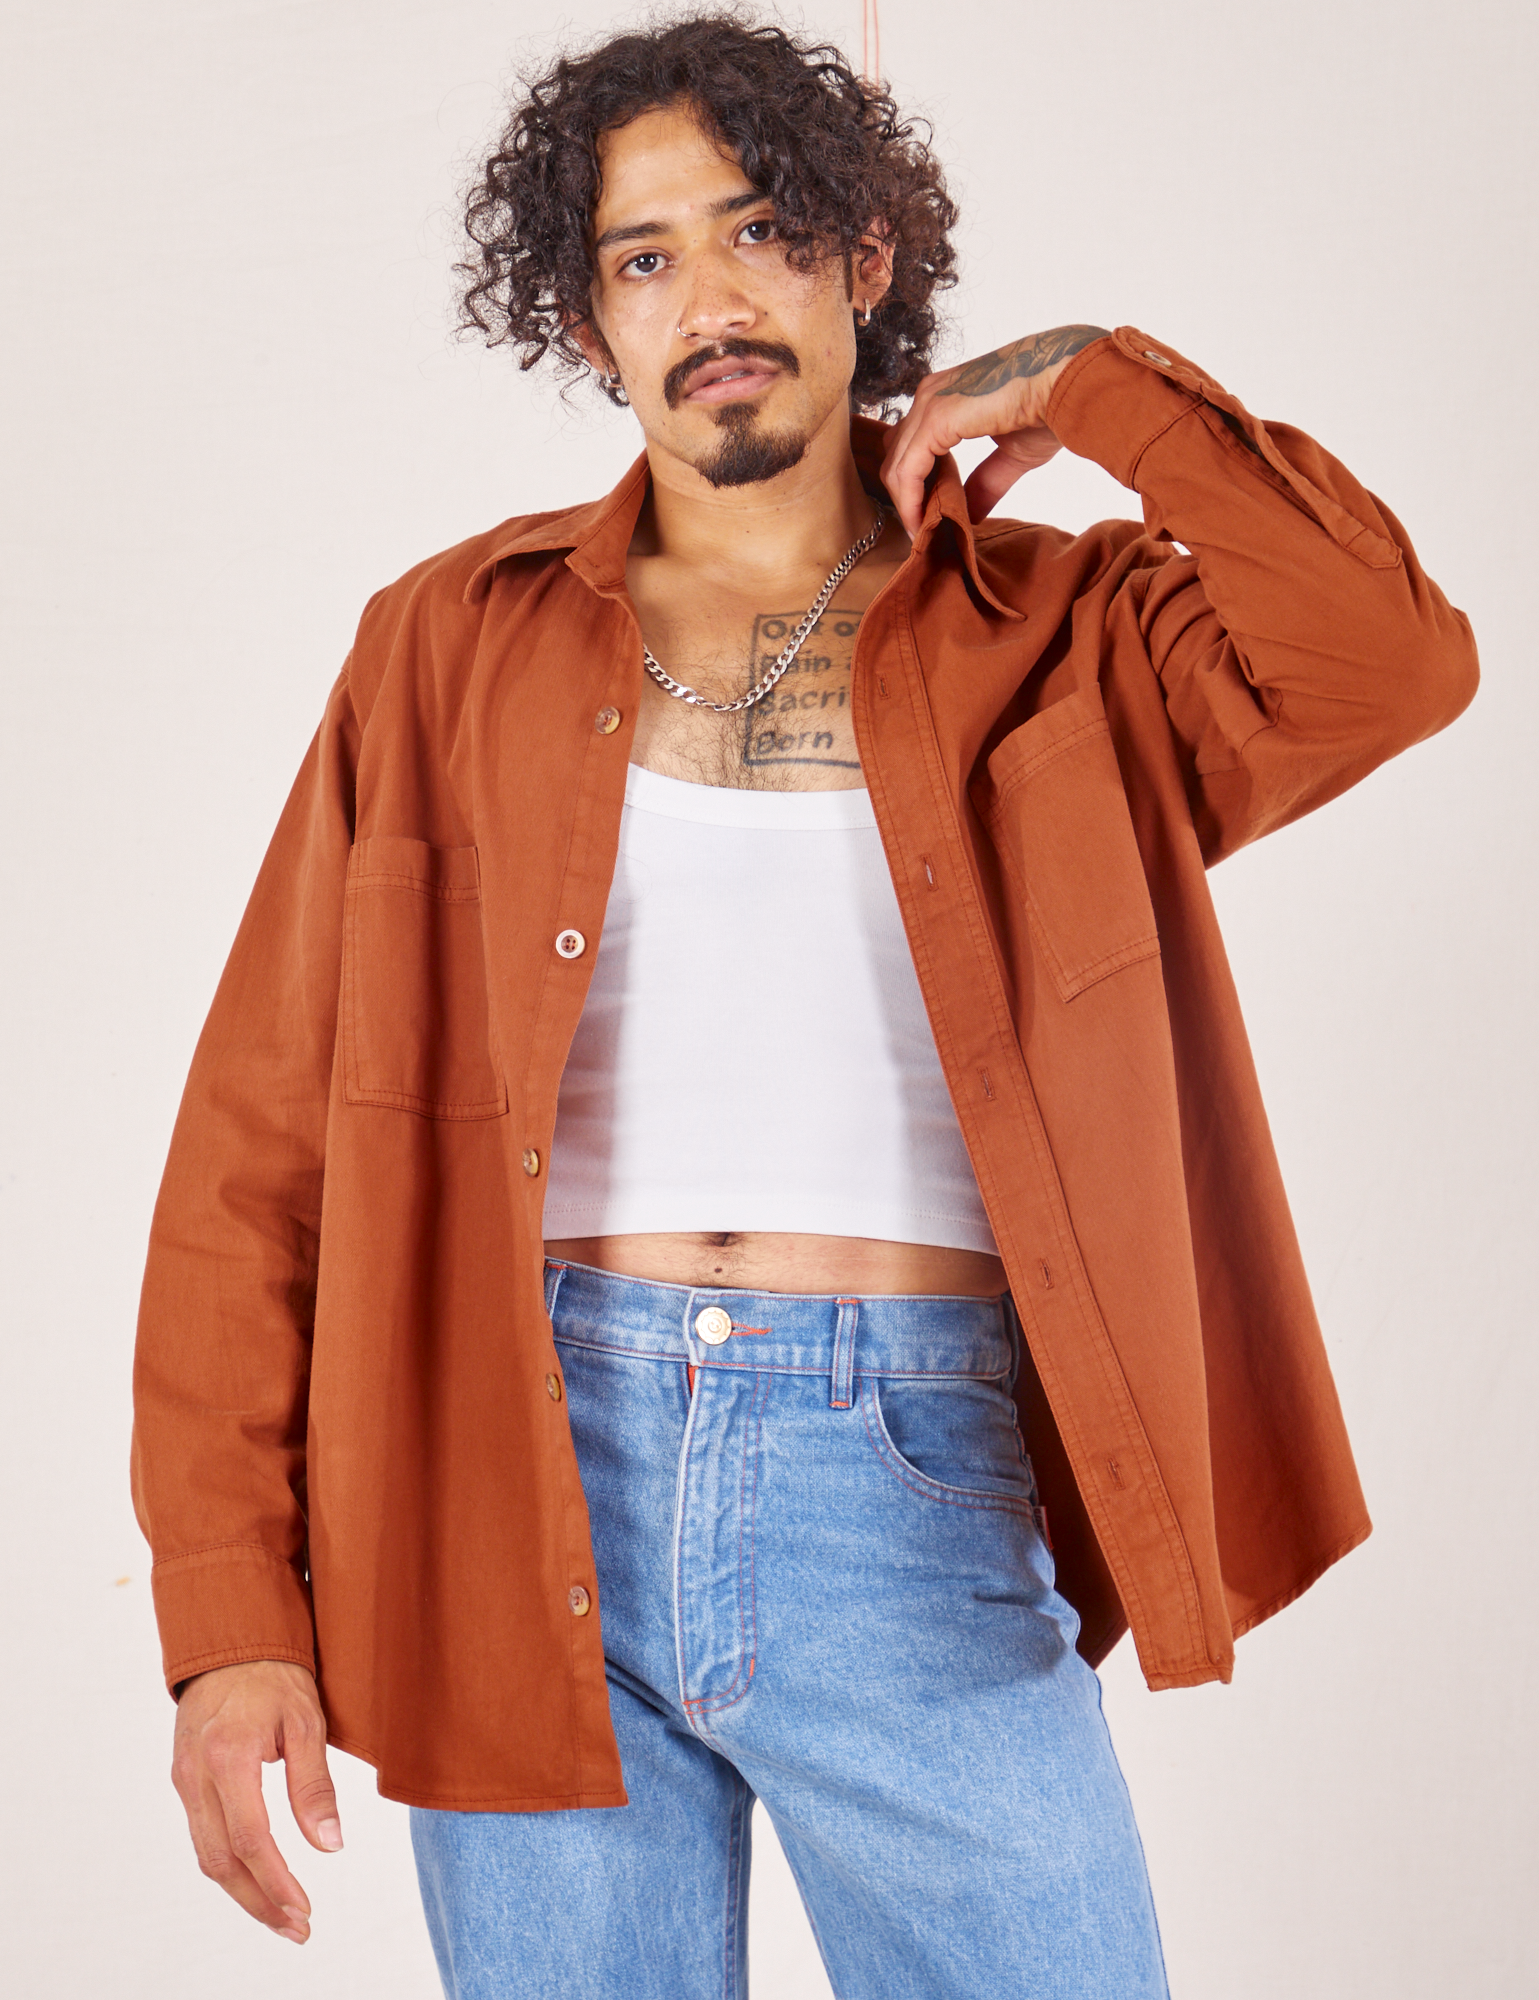 Jesse is wearing size S Oversize Overshirt in Burnt Terracotta paired with vintage off-white Cropped Tank Top